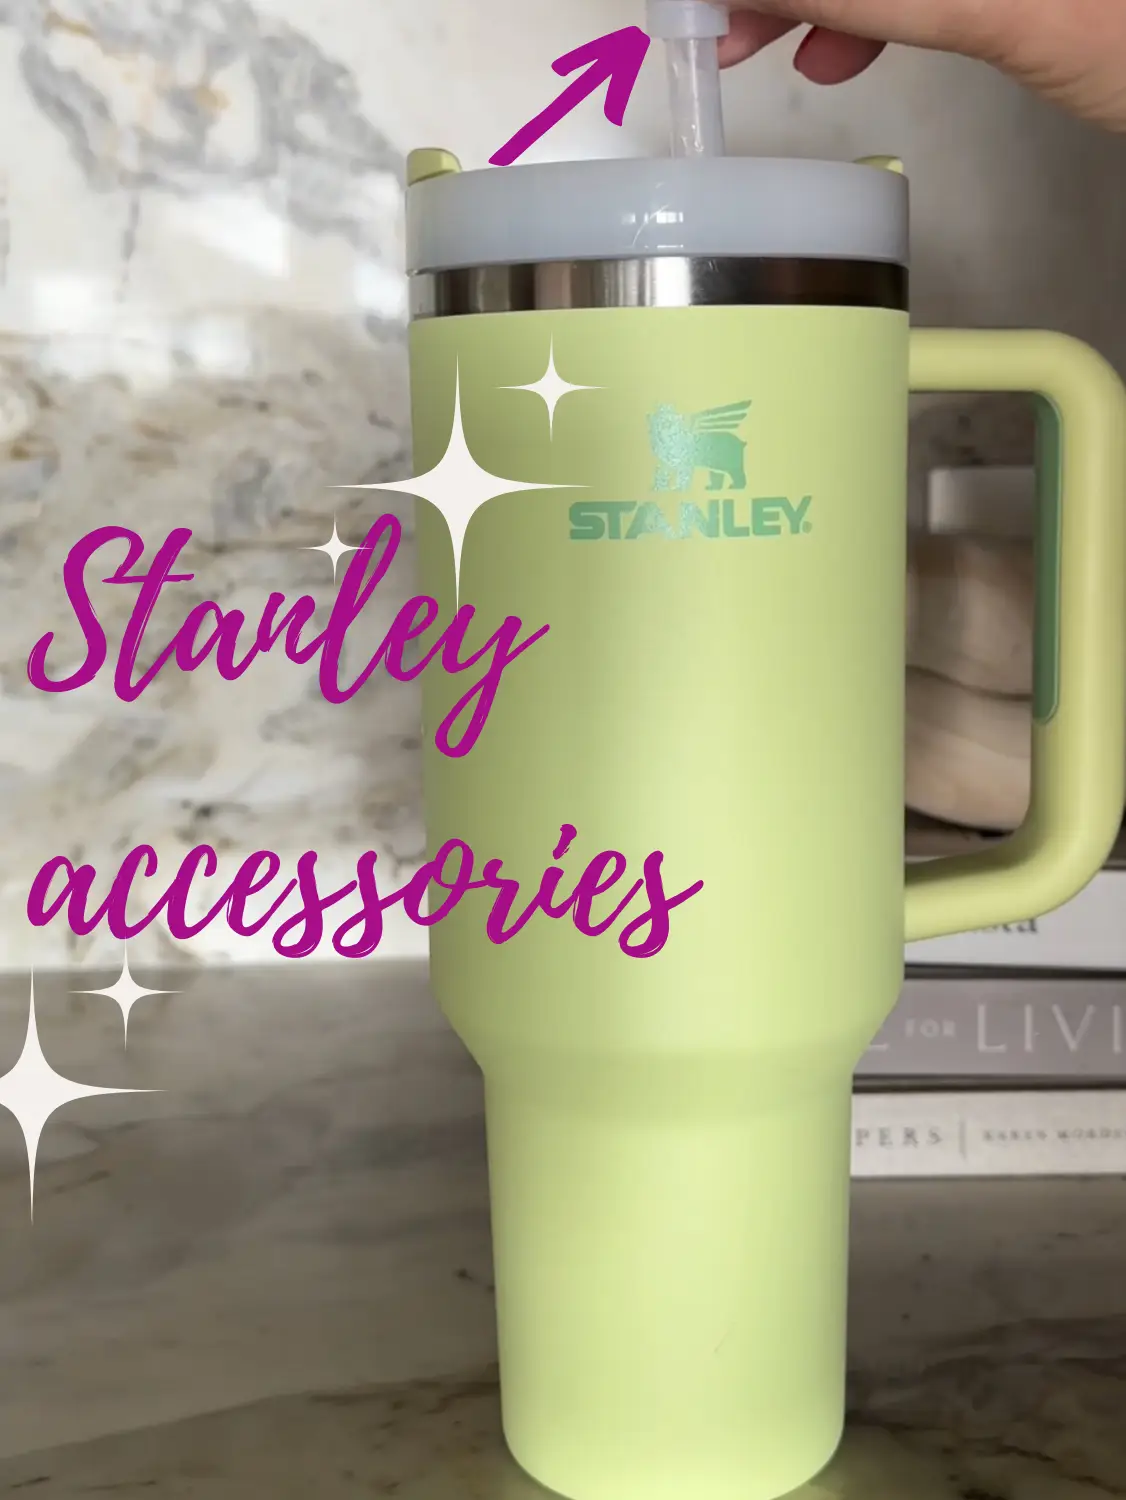 Lindsay's Sweet World: Unique Accessories for Stanley Cup Lovers